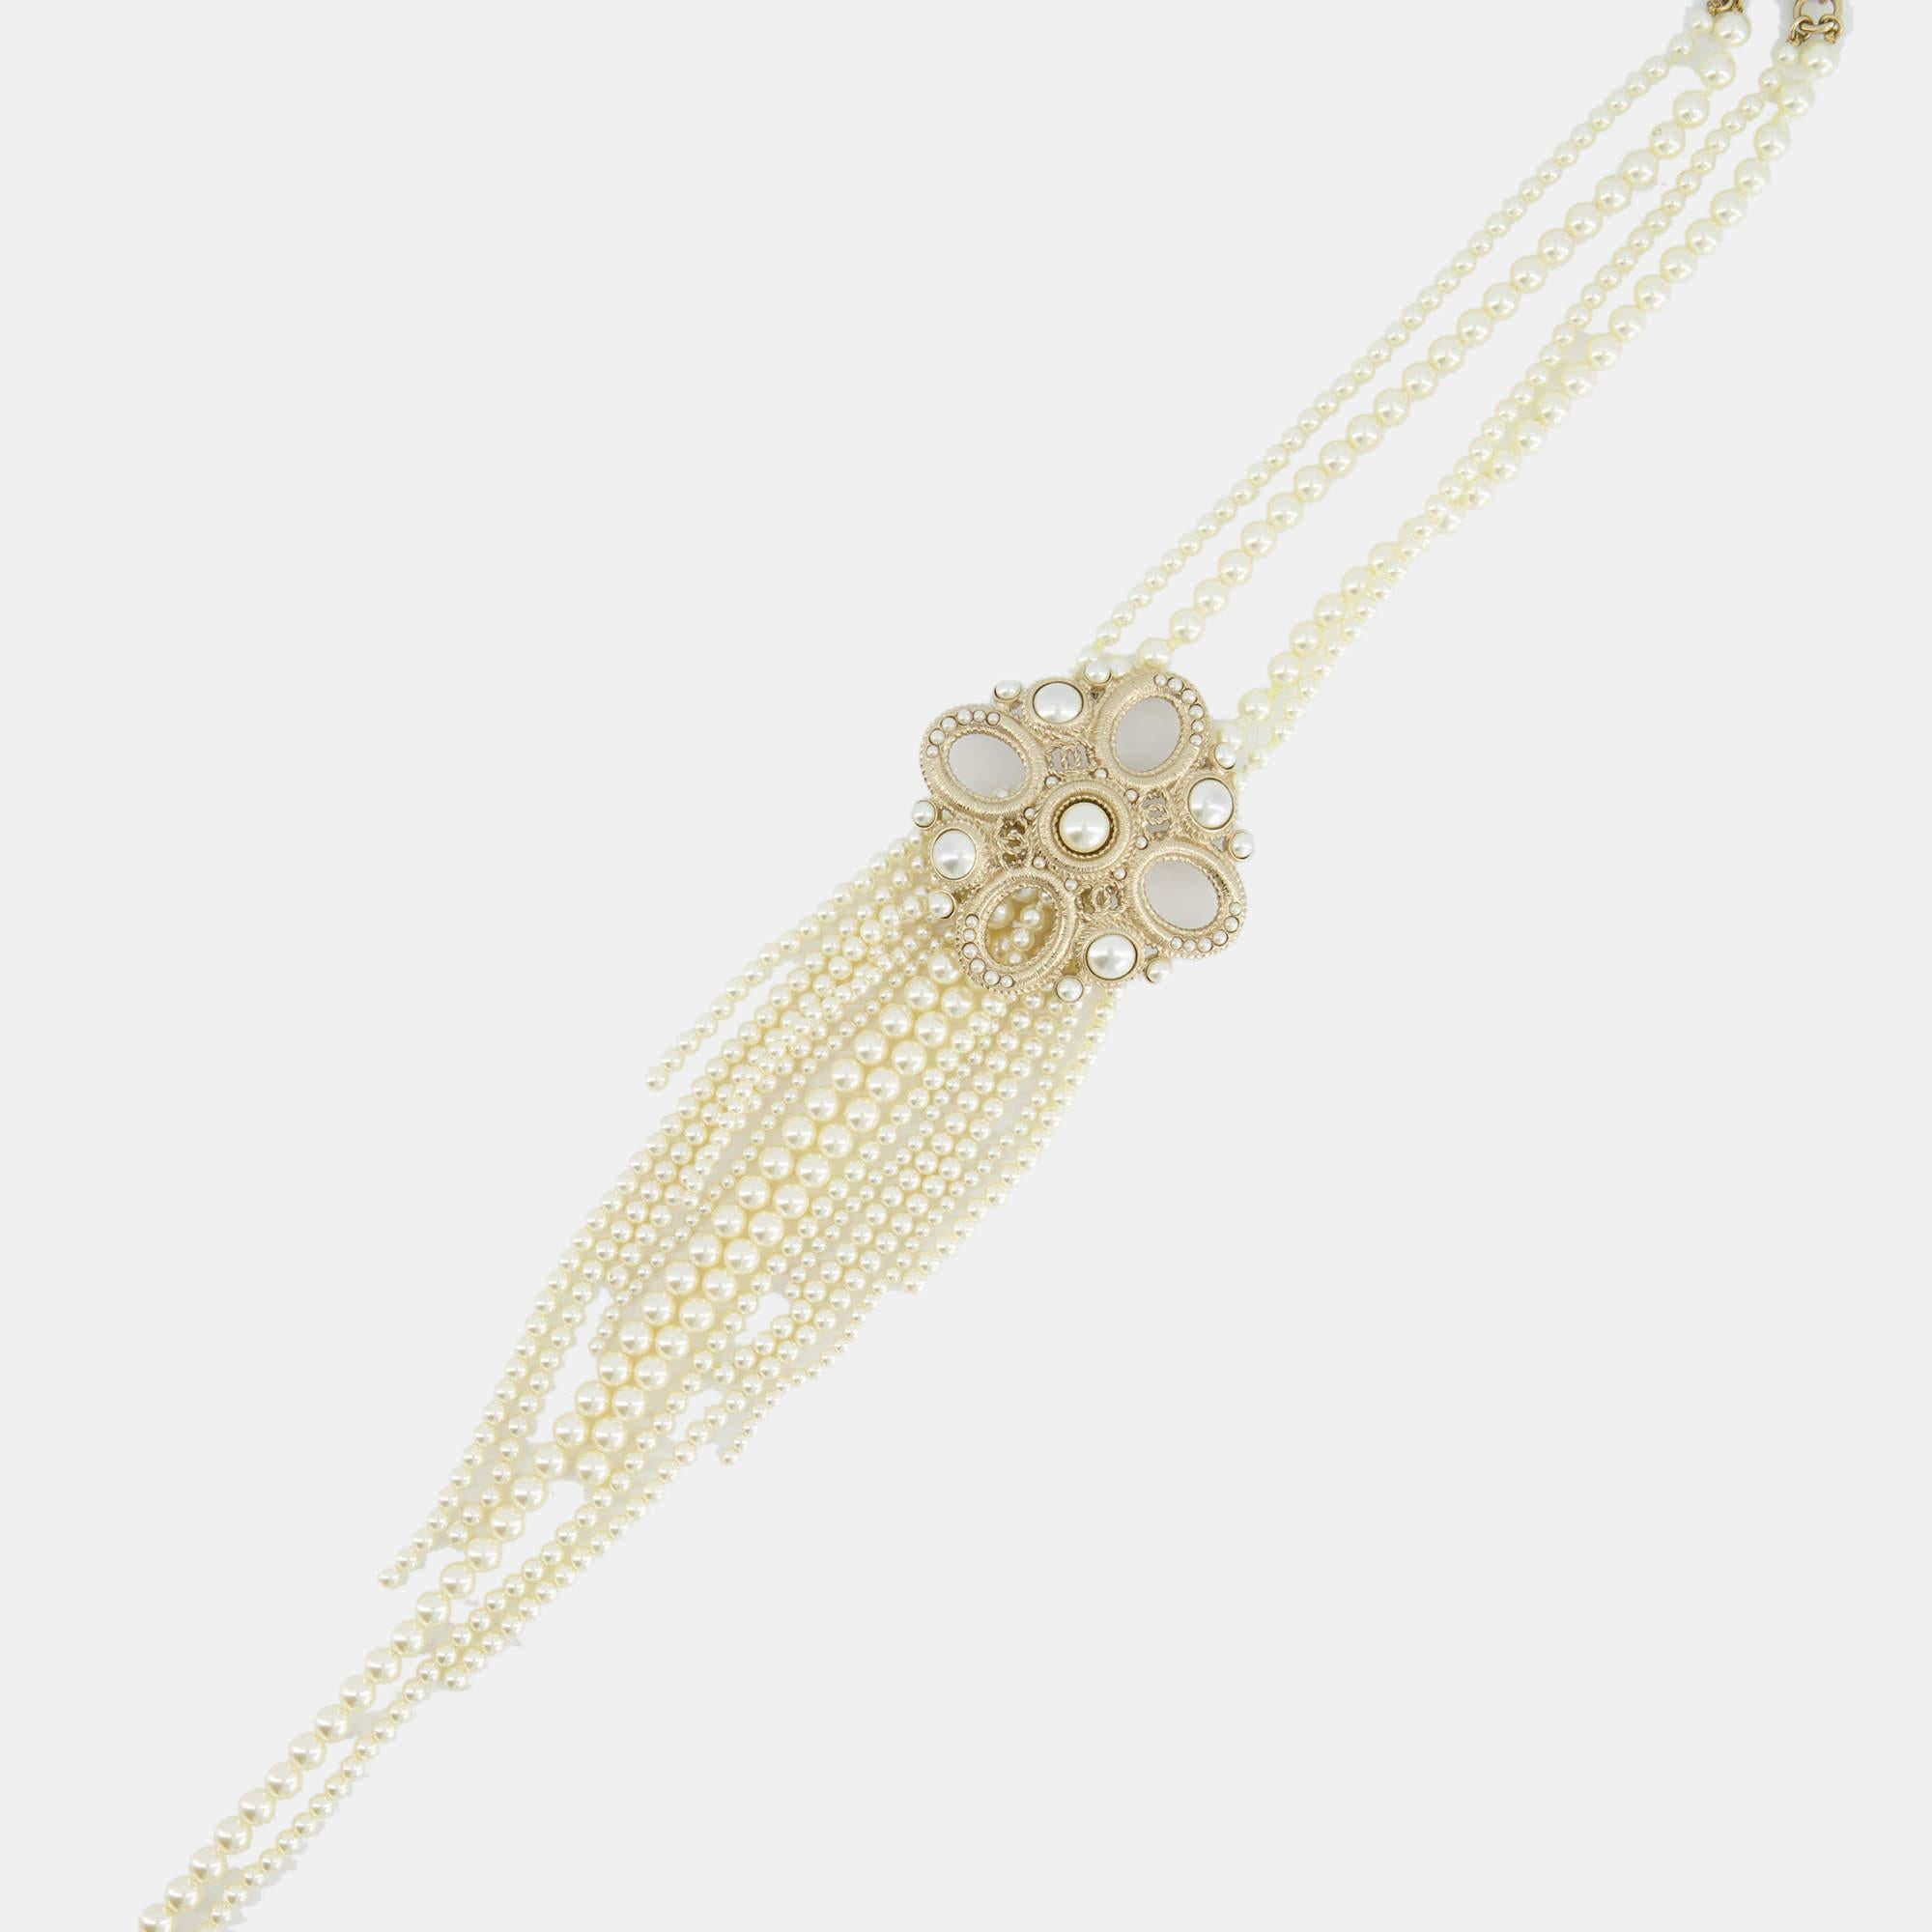 Elevate your elegance with this Chanel pearl necklace. Exquisite craftsmanship meets timeless design in this stunning piece, an embodiment of luxury and sophistication that complements every neckline.

